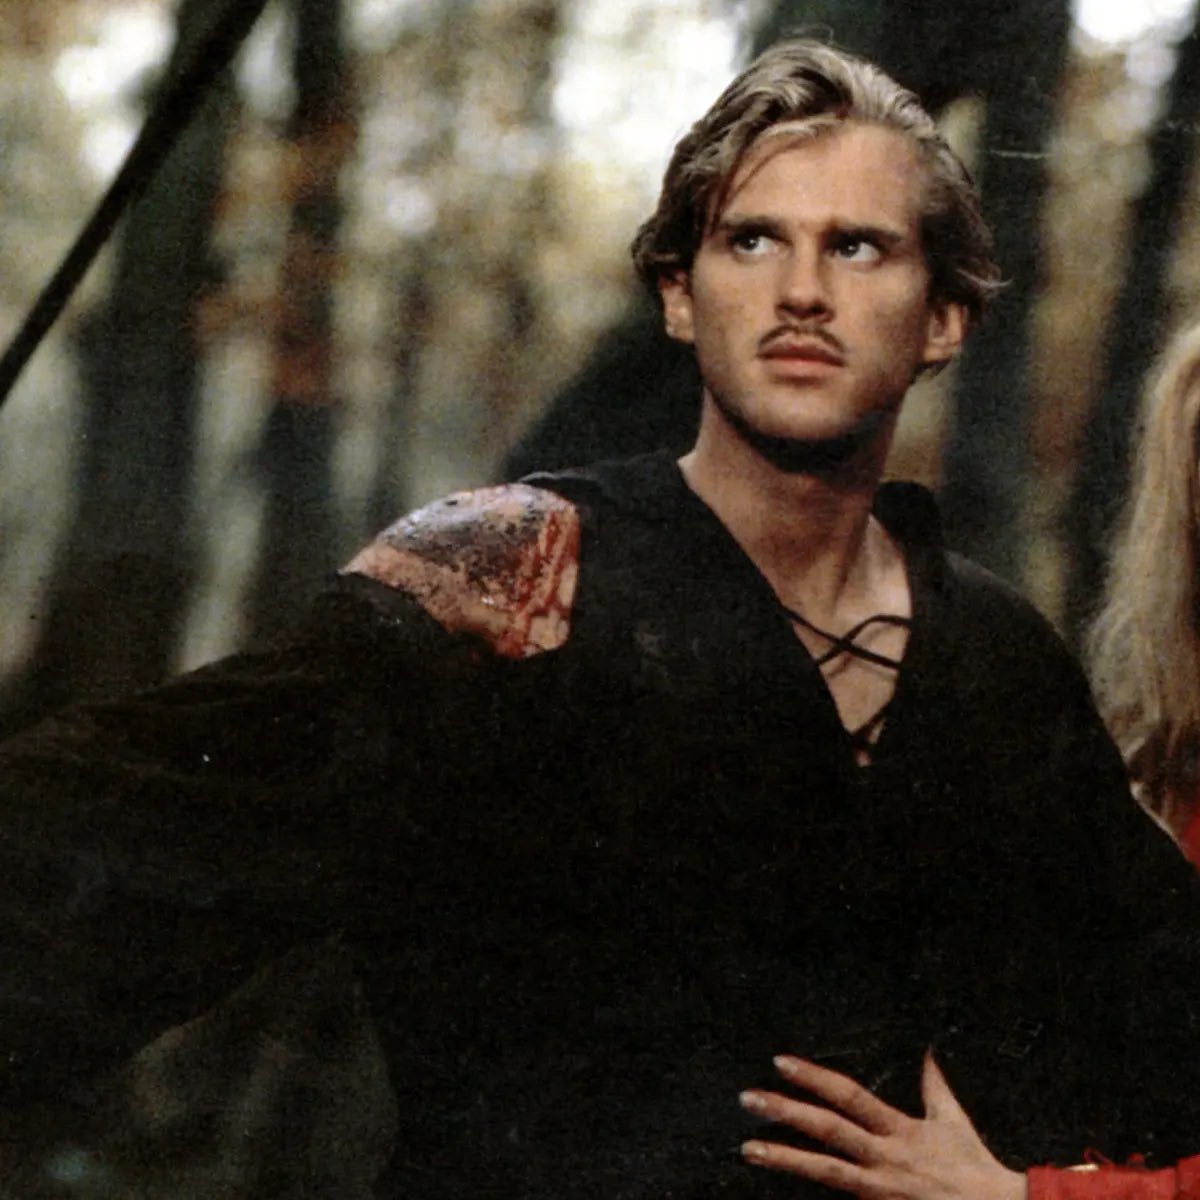 5: Cary Elwes. Specifically Wesley from princess bride